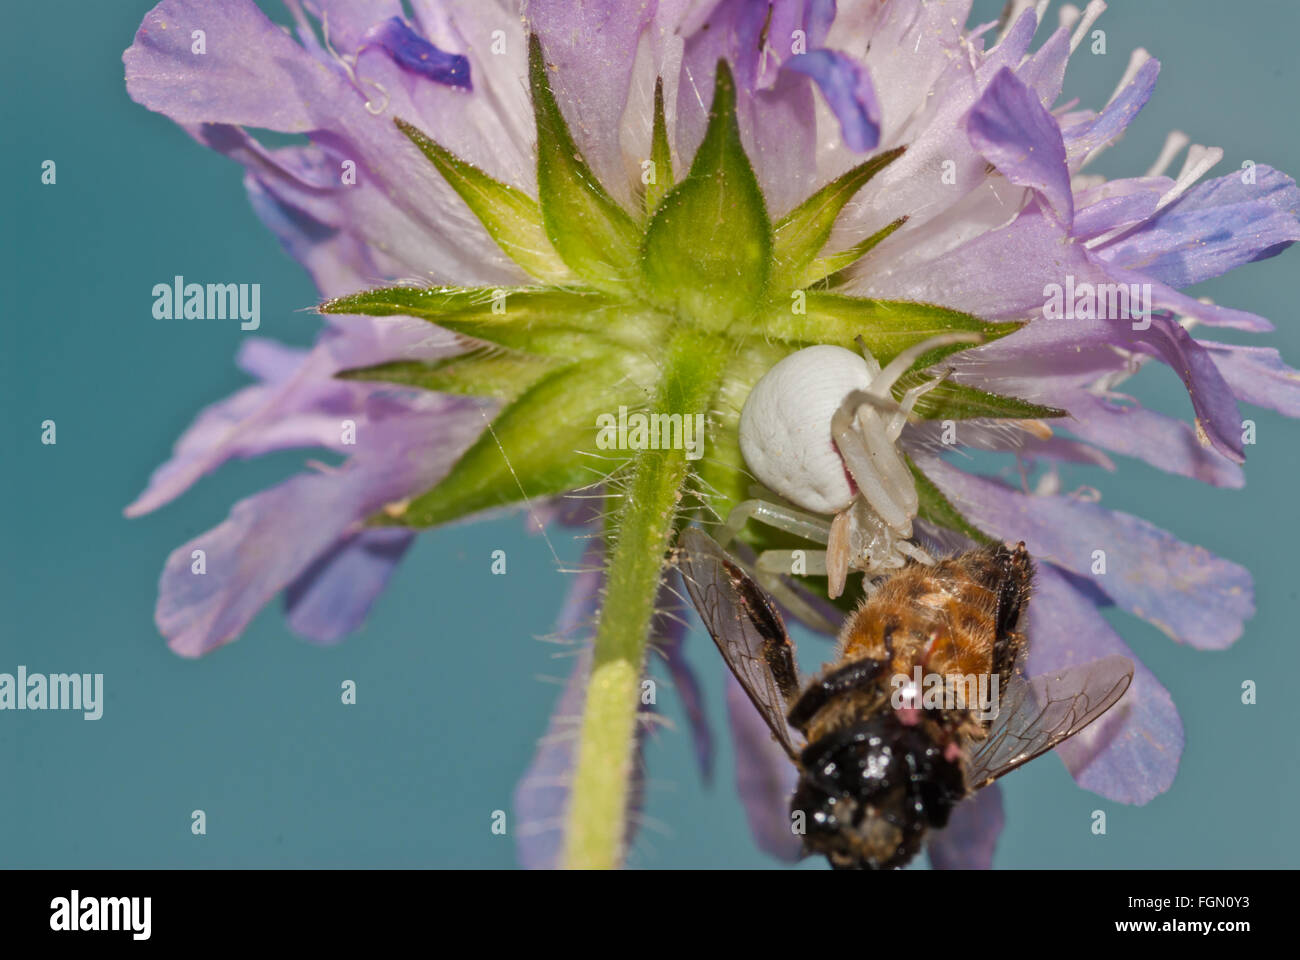 Goldenrod crab spider, Misumena vatia, with captured prey item on the underside of a field scabious flower, Alberta, Canada. Stock Photo